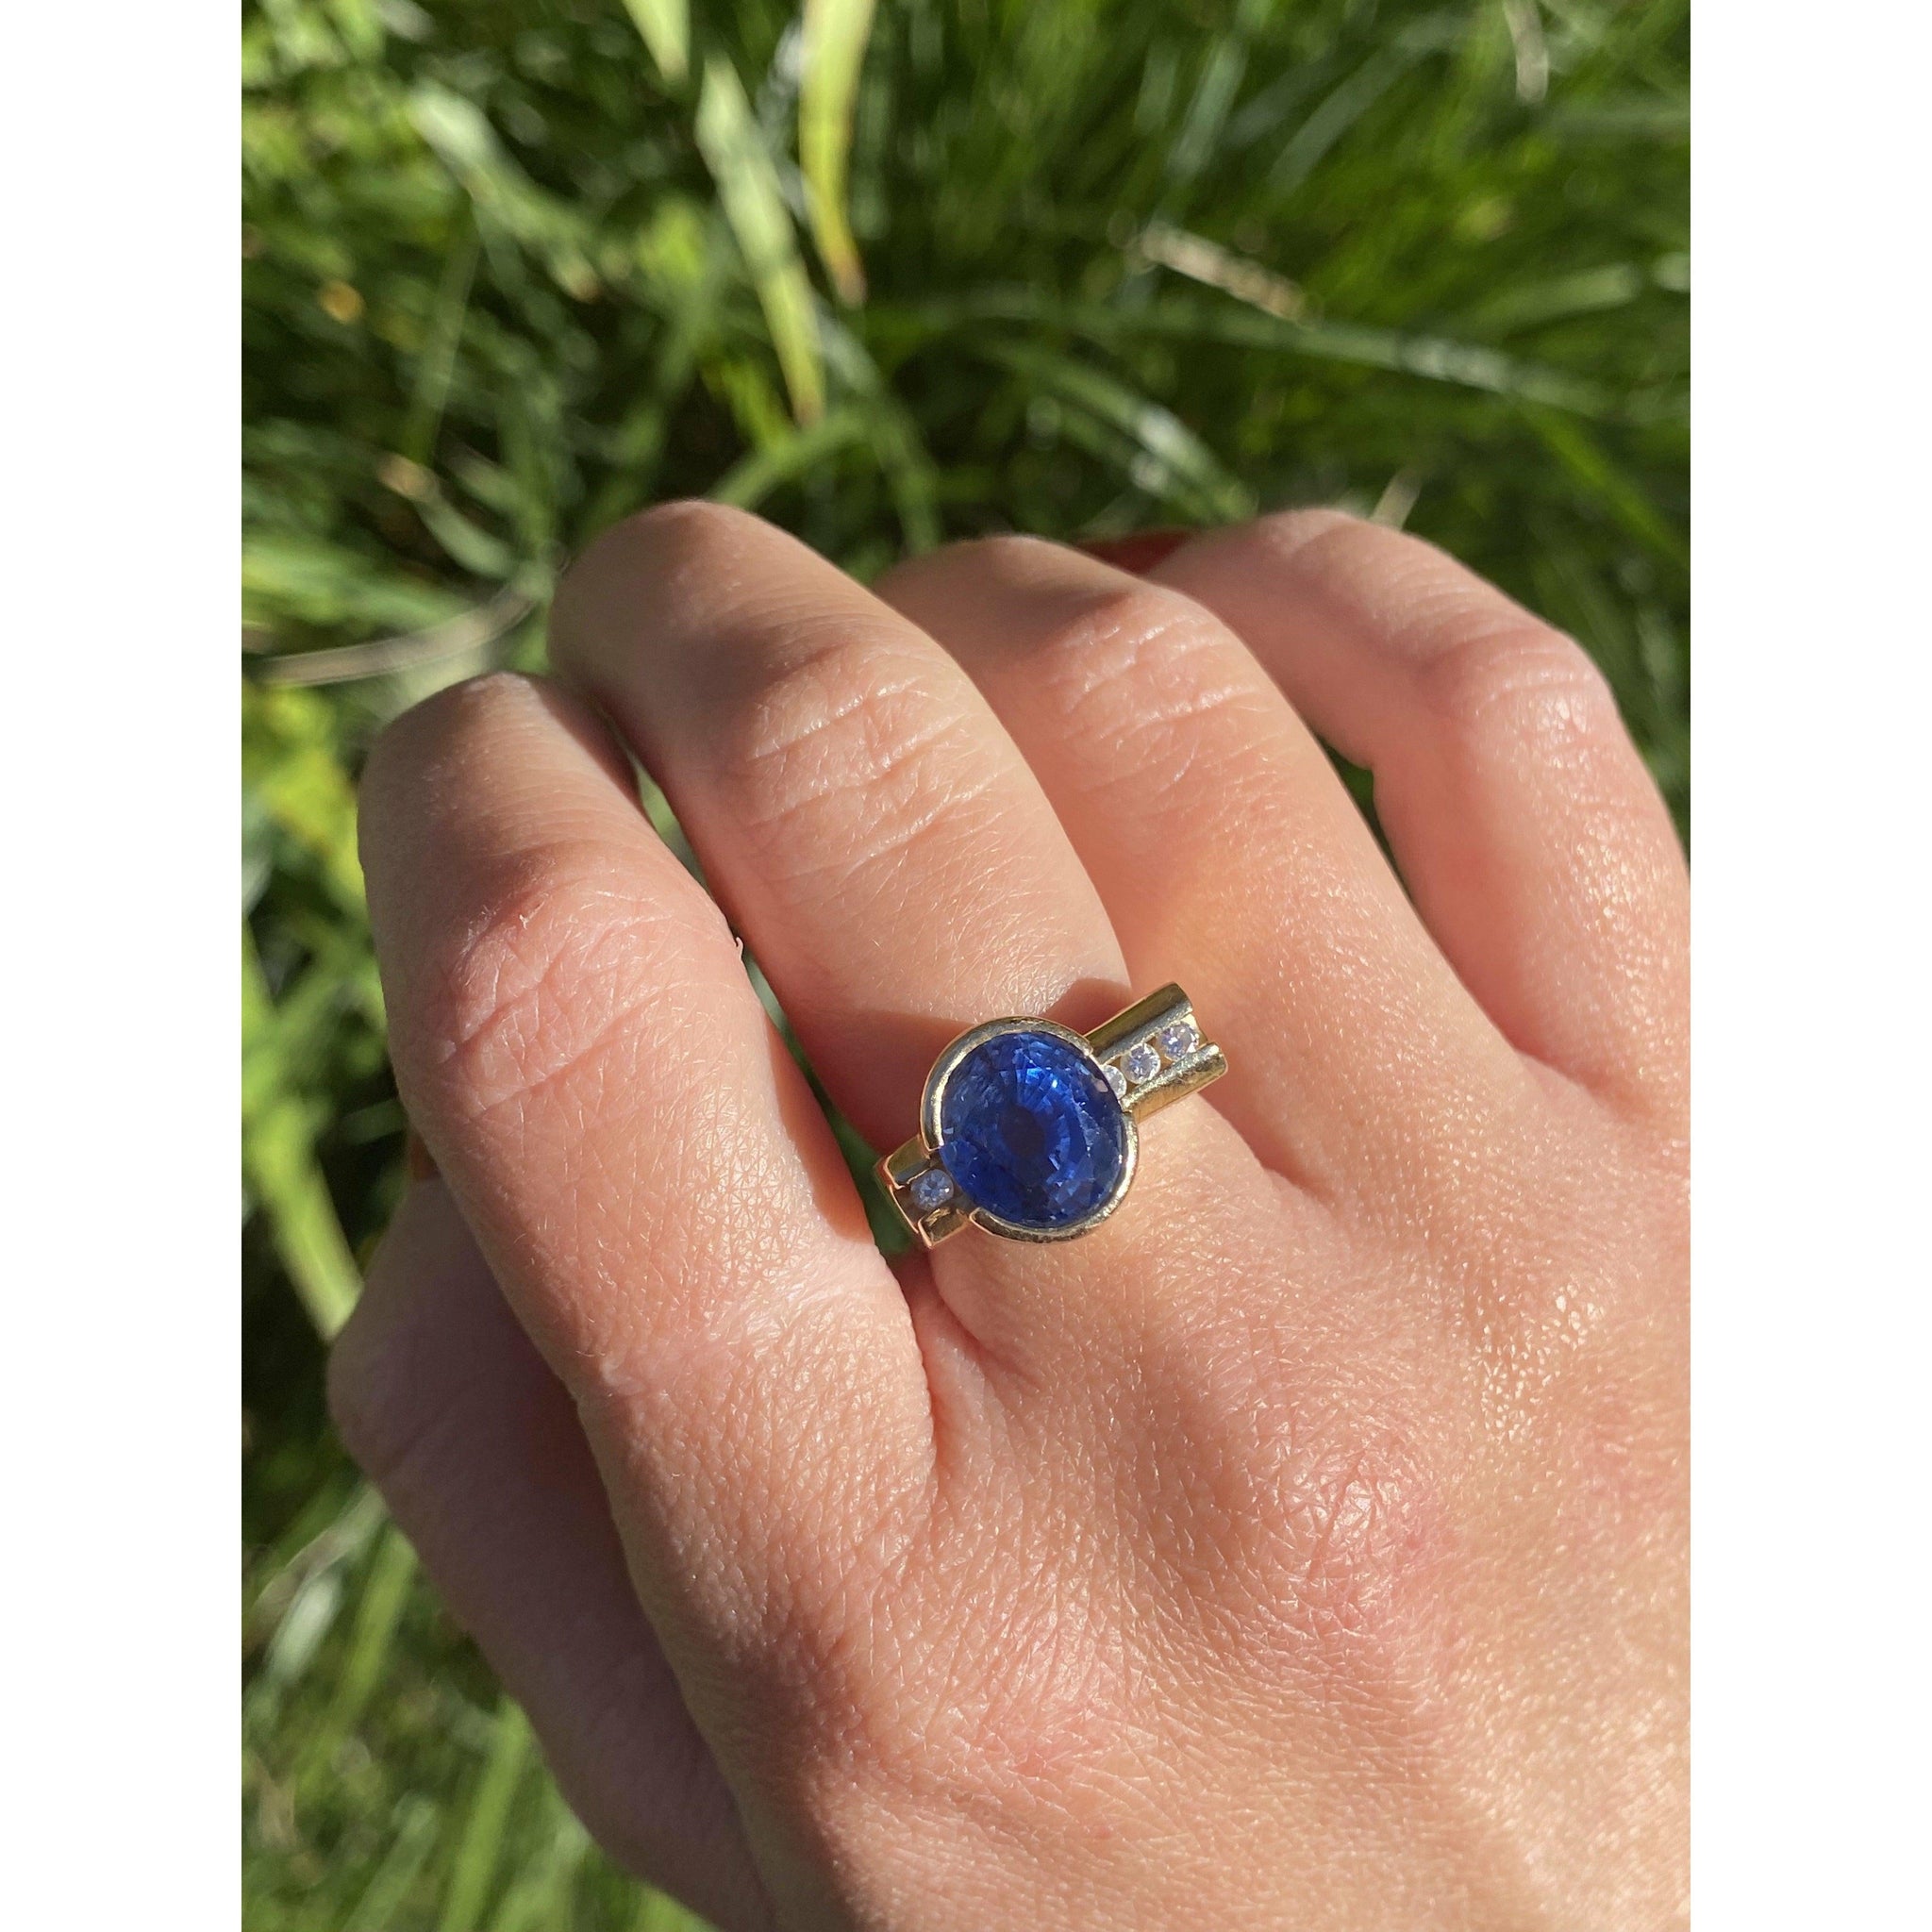 5 carat Oval Cut Ceylon Blue Sapphire Ring in 14K Solid Gold - ASSAY